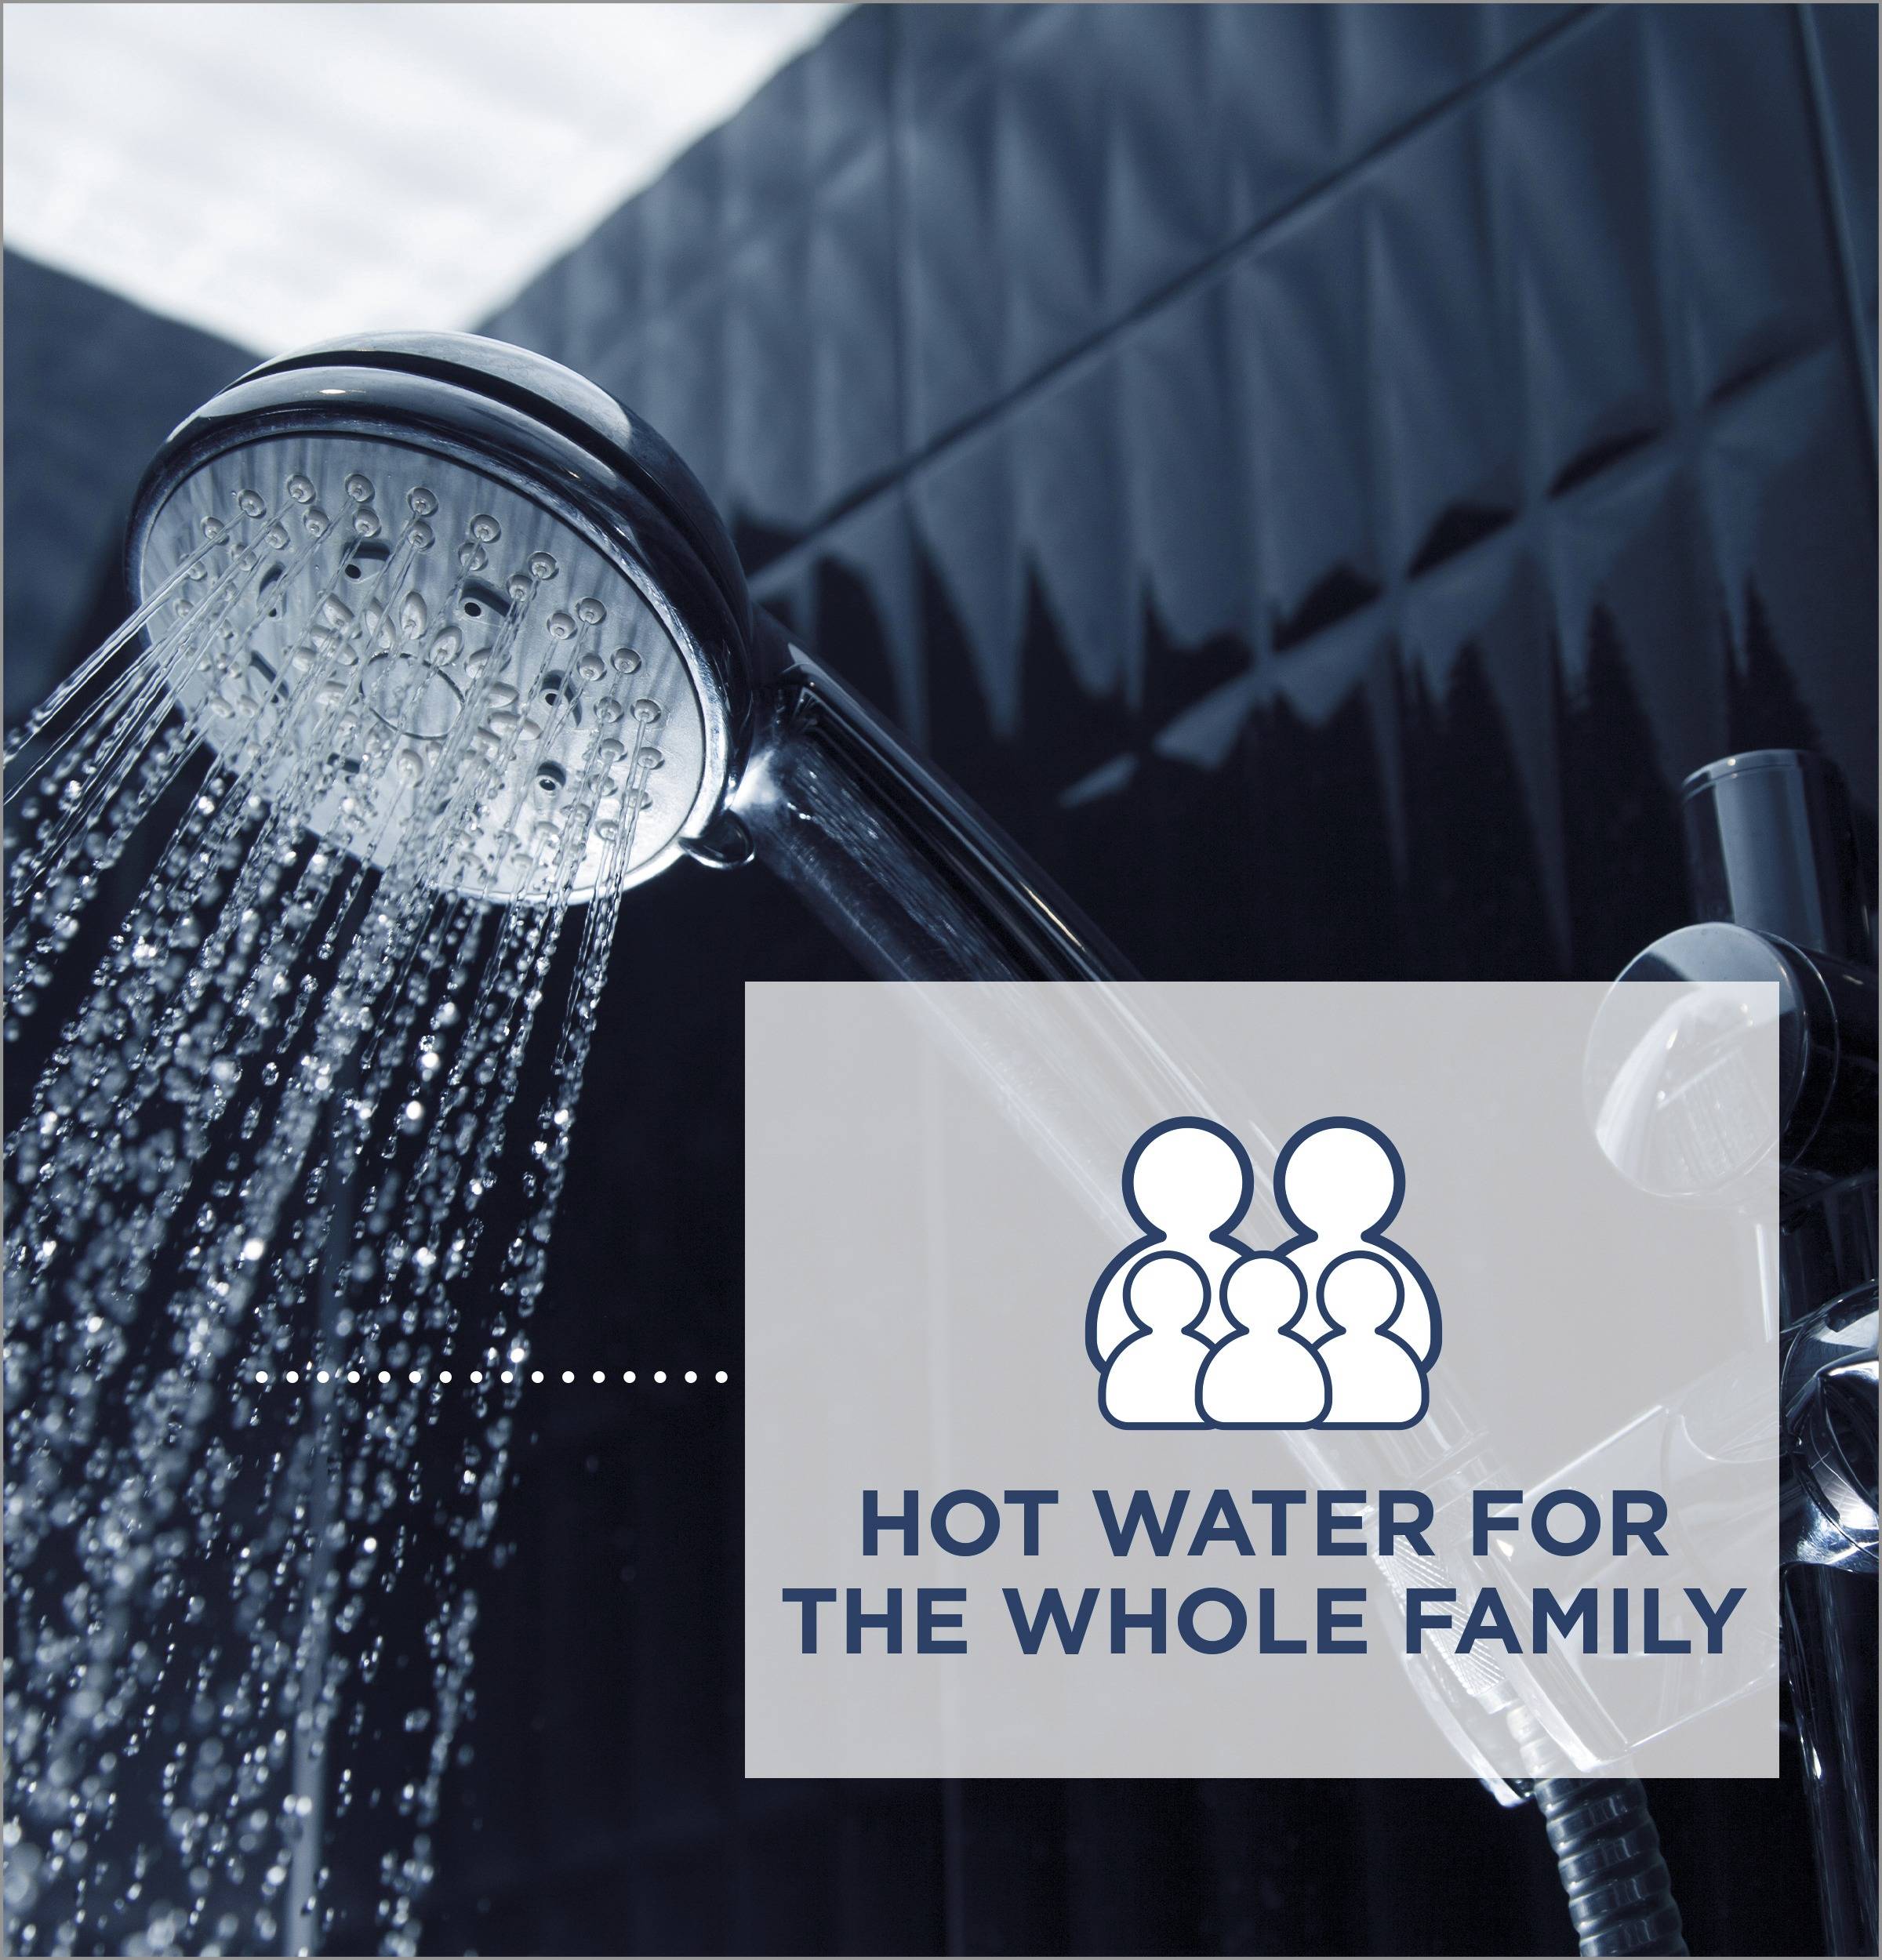 Shower head: Hot water for the whole family